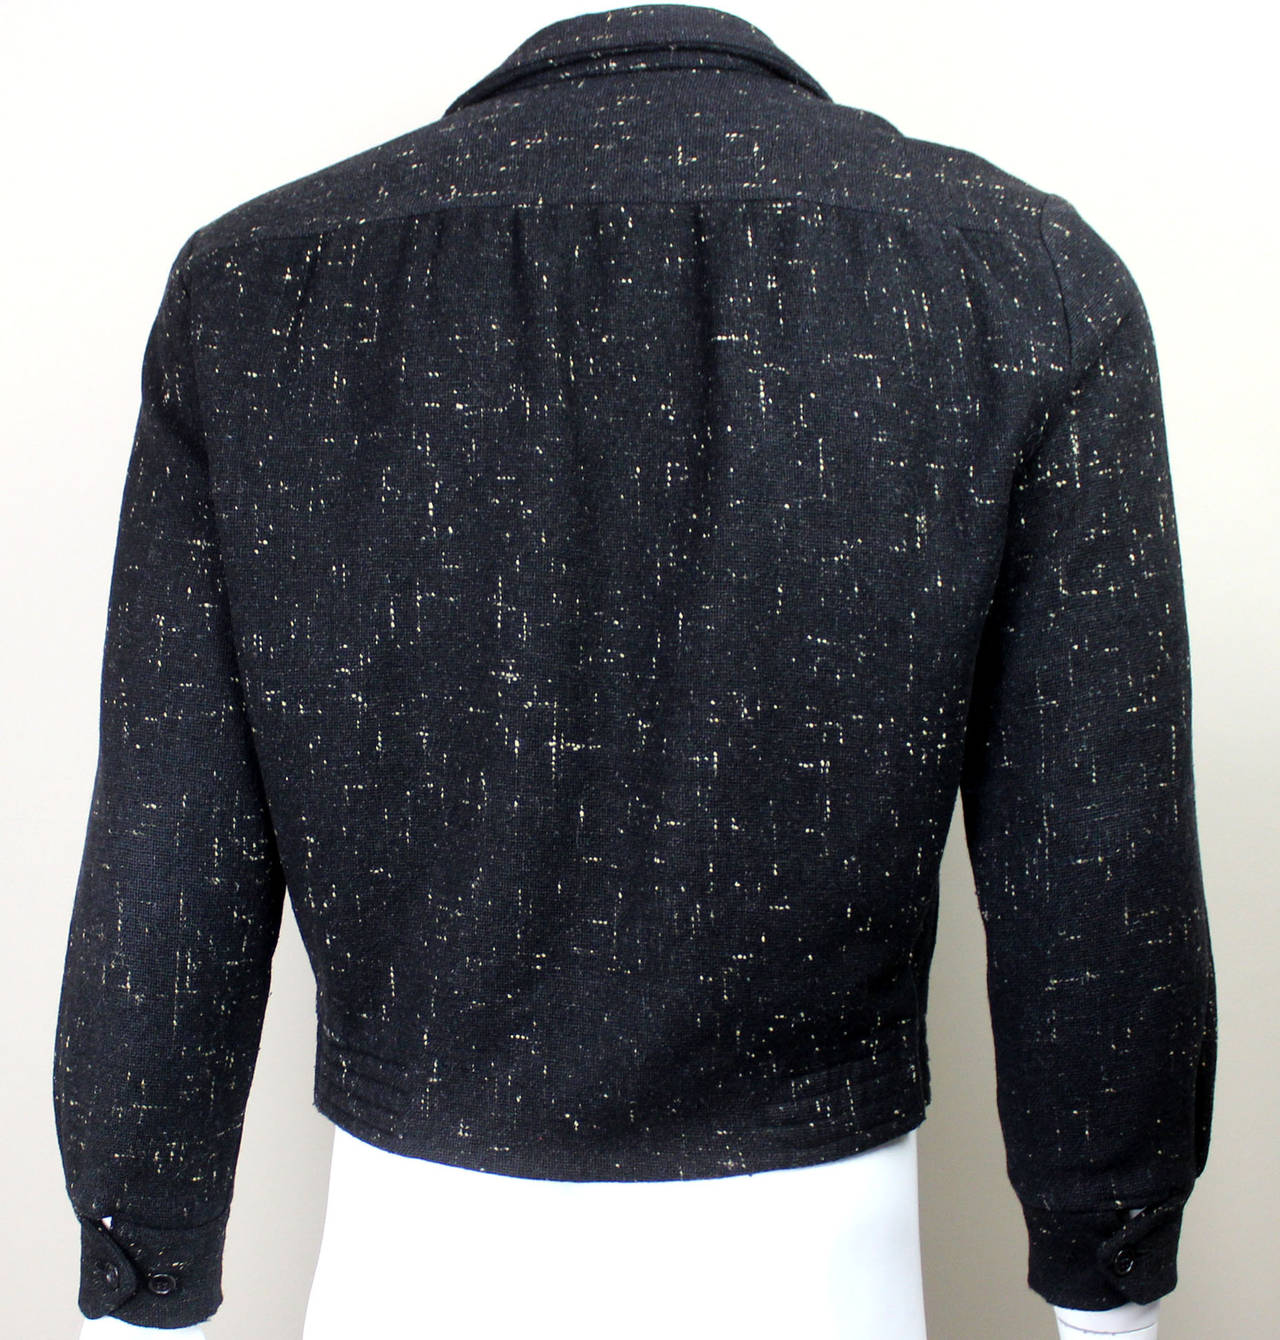 A staple in Ricky Ricardo's wardrobe, these 1950's flecked wool classic jackets are very hard to come by these days. Waist length, zip-up Rockabilly style jacket with a fitted waistband and buttoned cuffs. Two flap pockets adorn the front. The label